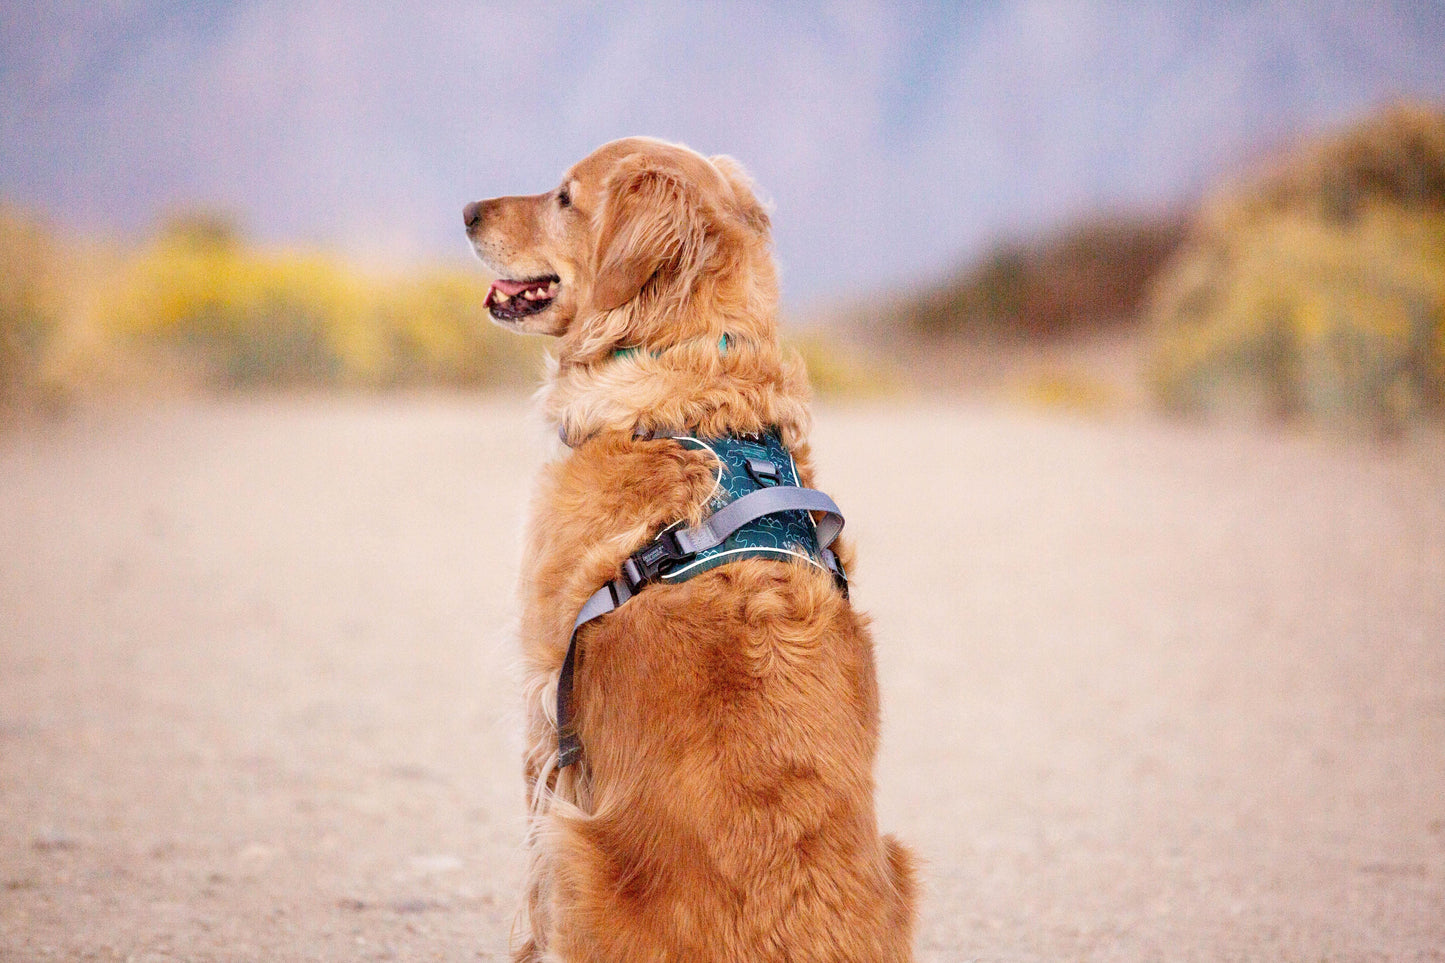 Wildside Dog Gear, golden retriever dog with utah mountain background with dog harness with handle in teal green color, dog friendly hikes slc, dog friendly hikes utah, dog walking training harness dog collar quick release buckle dog harness durable dog collars for big dogs that pull dog harness no escape dog harness small dog harness easy to put on best dog walking harness for large dogs, golden retriever in dog harness 